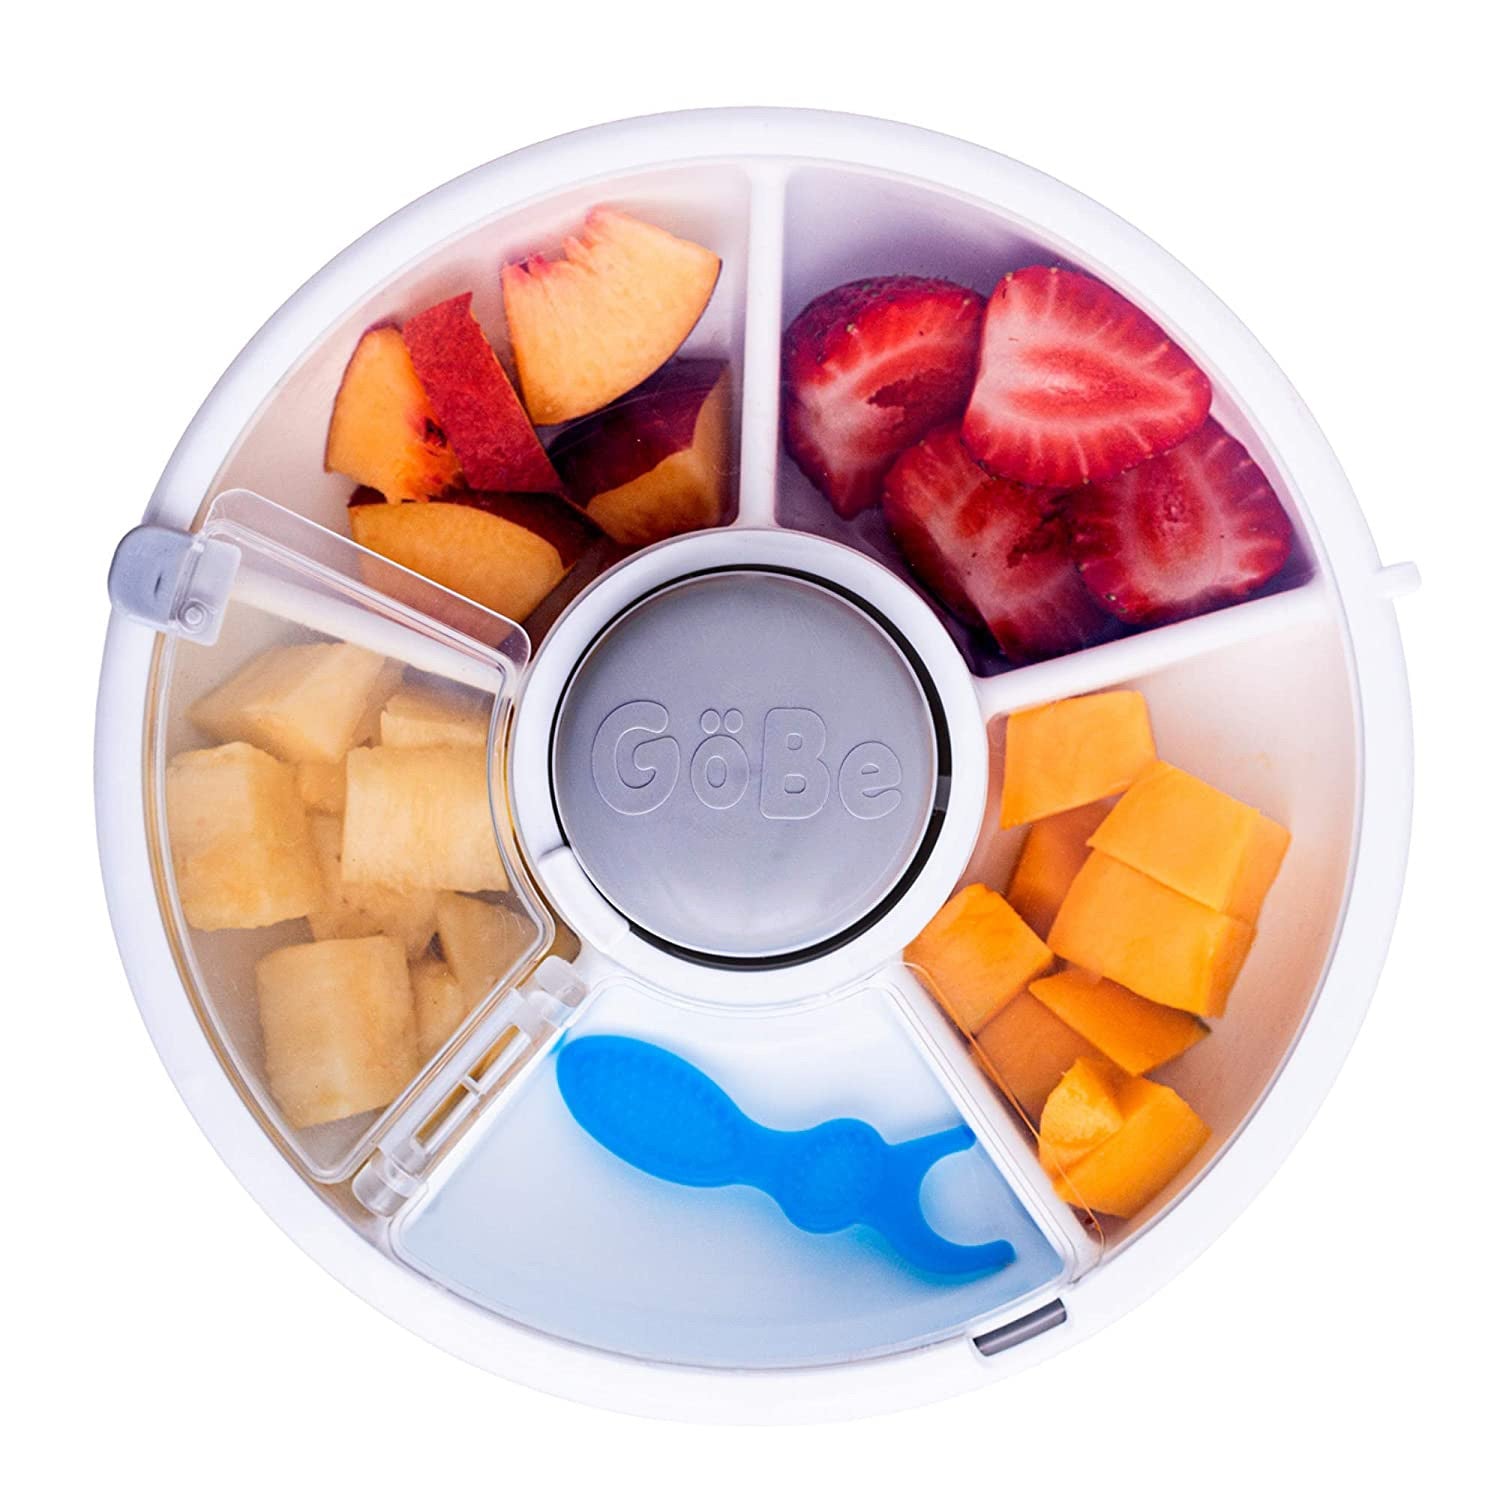 Gobe snack and meal spinner plate with divided, compartment